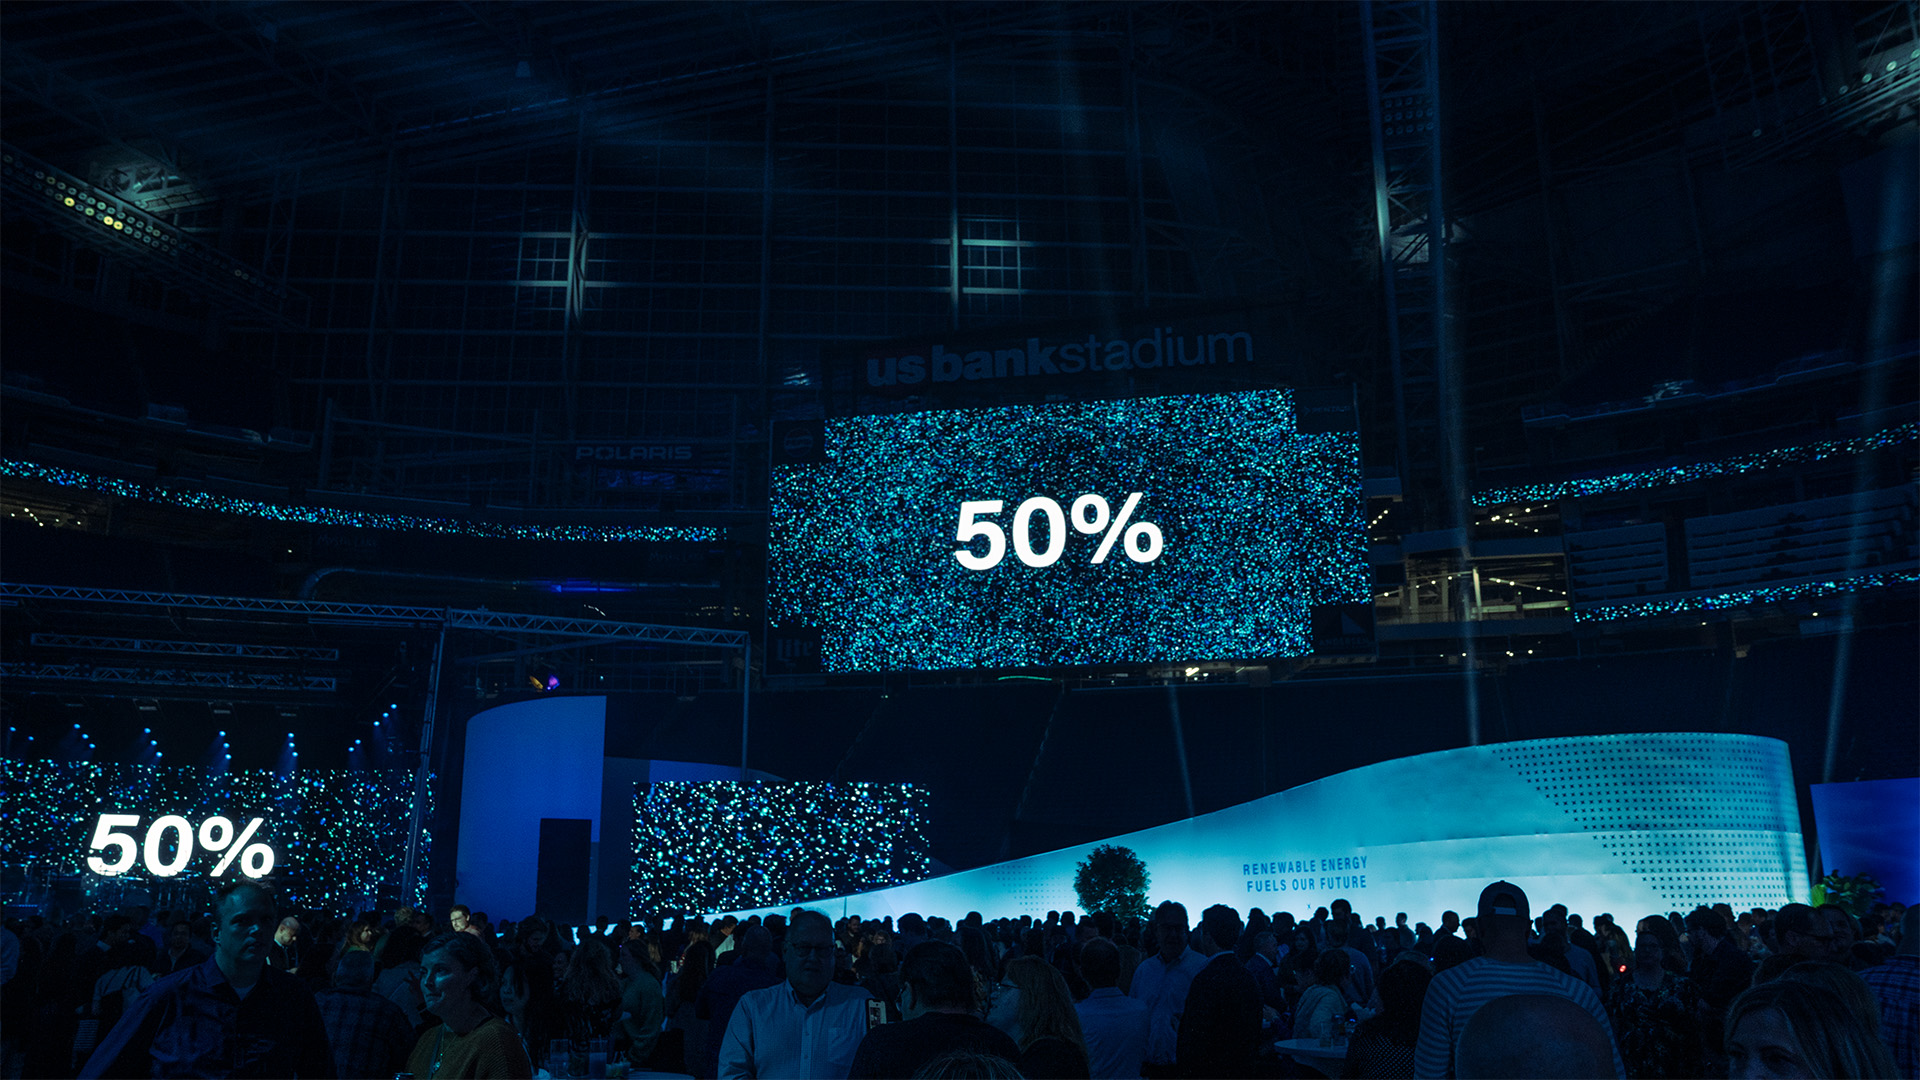 A wide-angle shot of people talking in the stadium. The stage screen at the back is showing "50%" in big font at the center, with a particle background. Another big screen on the back, hanging at the mid air is showing a similar image of percentage